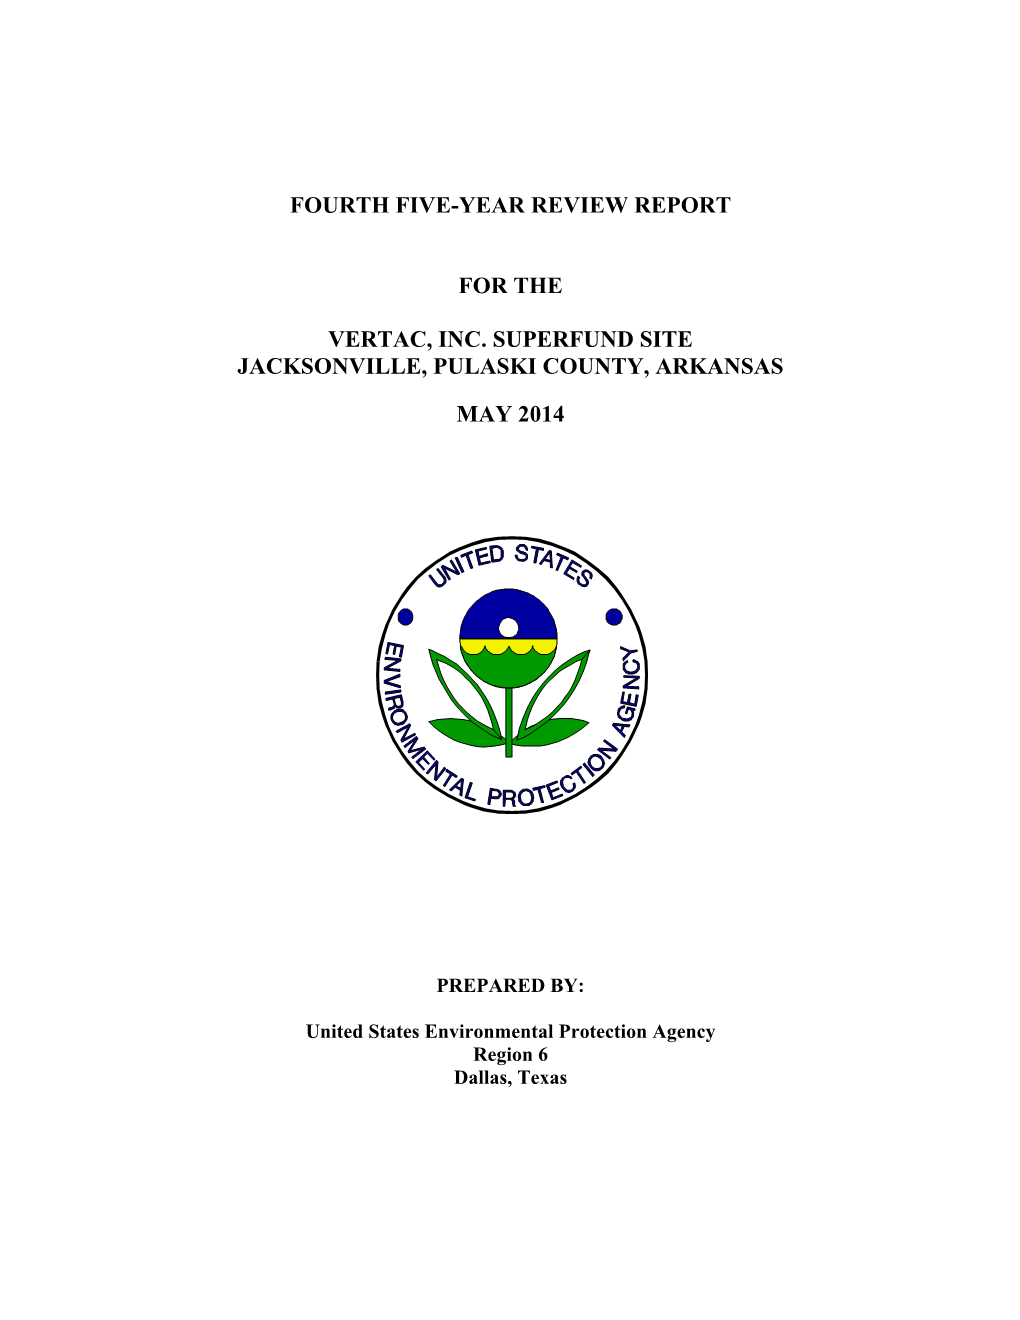 Five Year Review Was Collected Between April and November 2013 and Are Documented in This Report